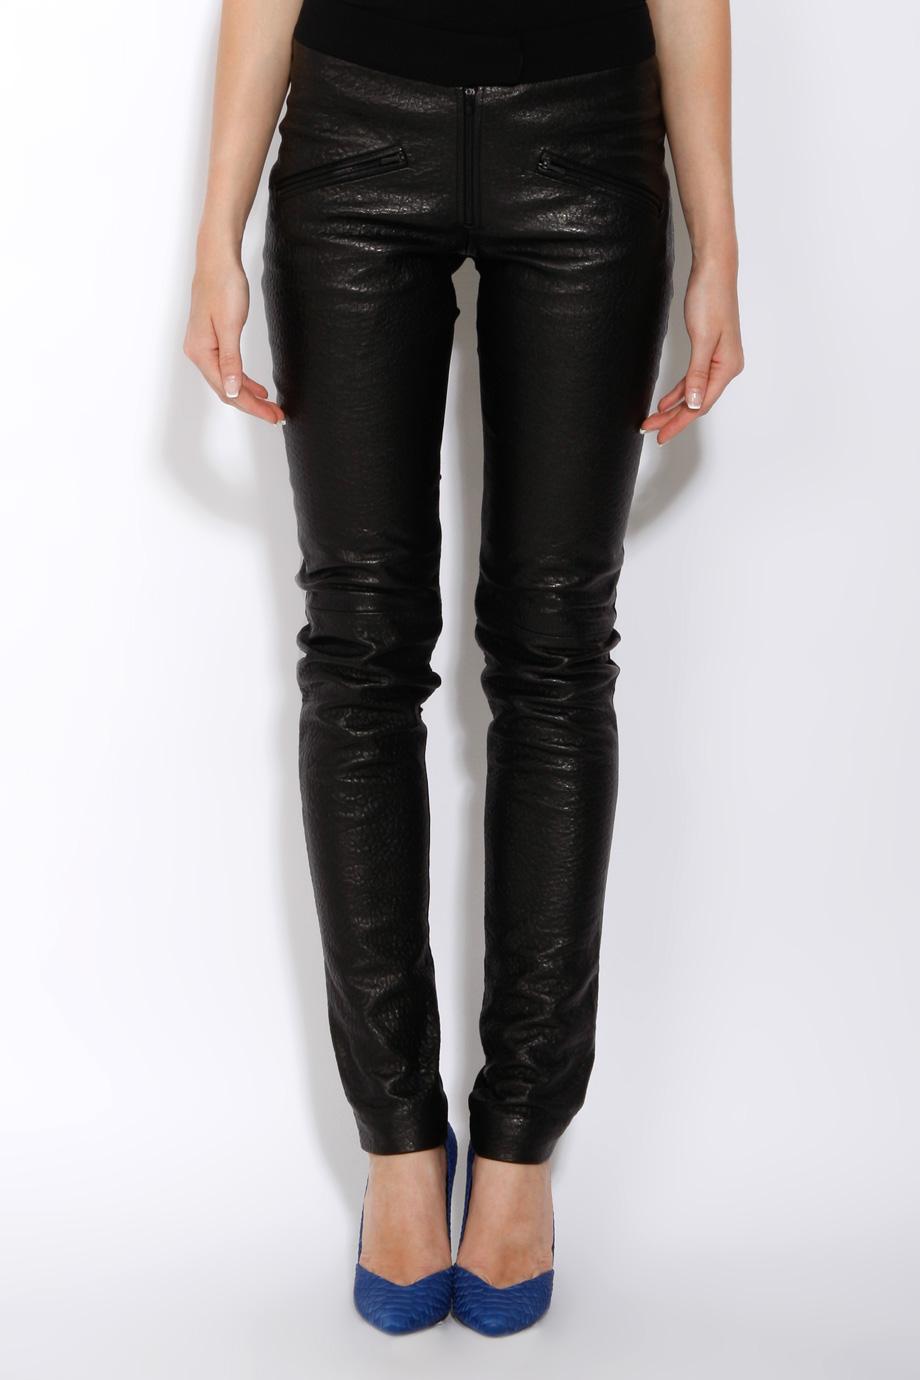 Lyst - Preen by thornton bregazzi Leather Front Ted Slim Pants in Black ...